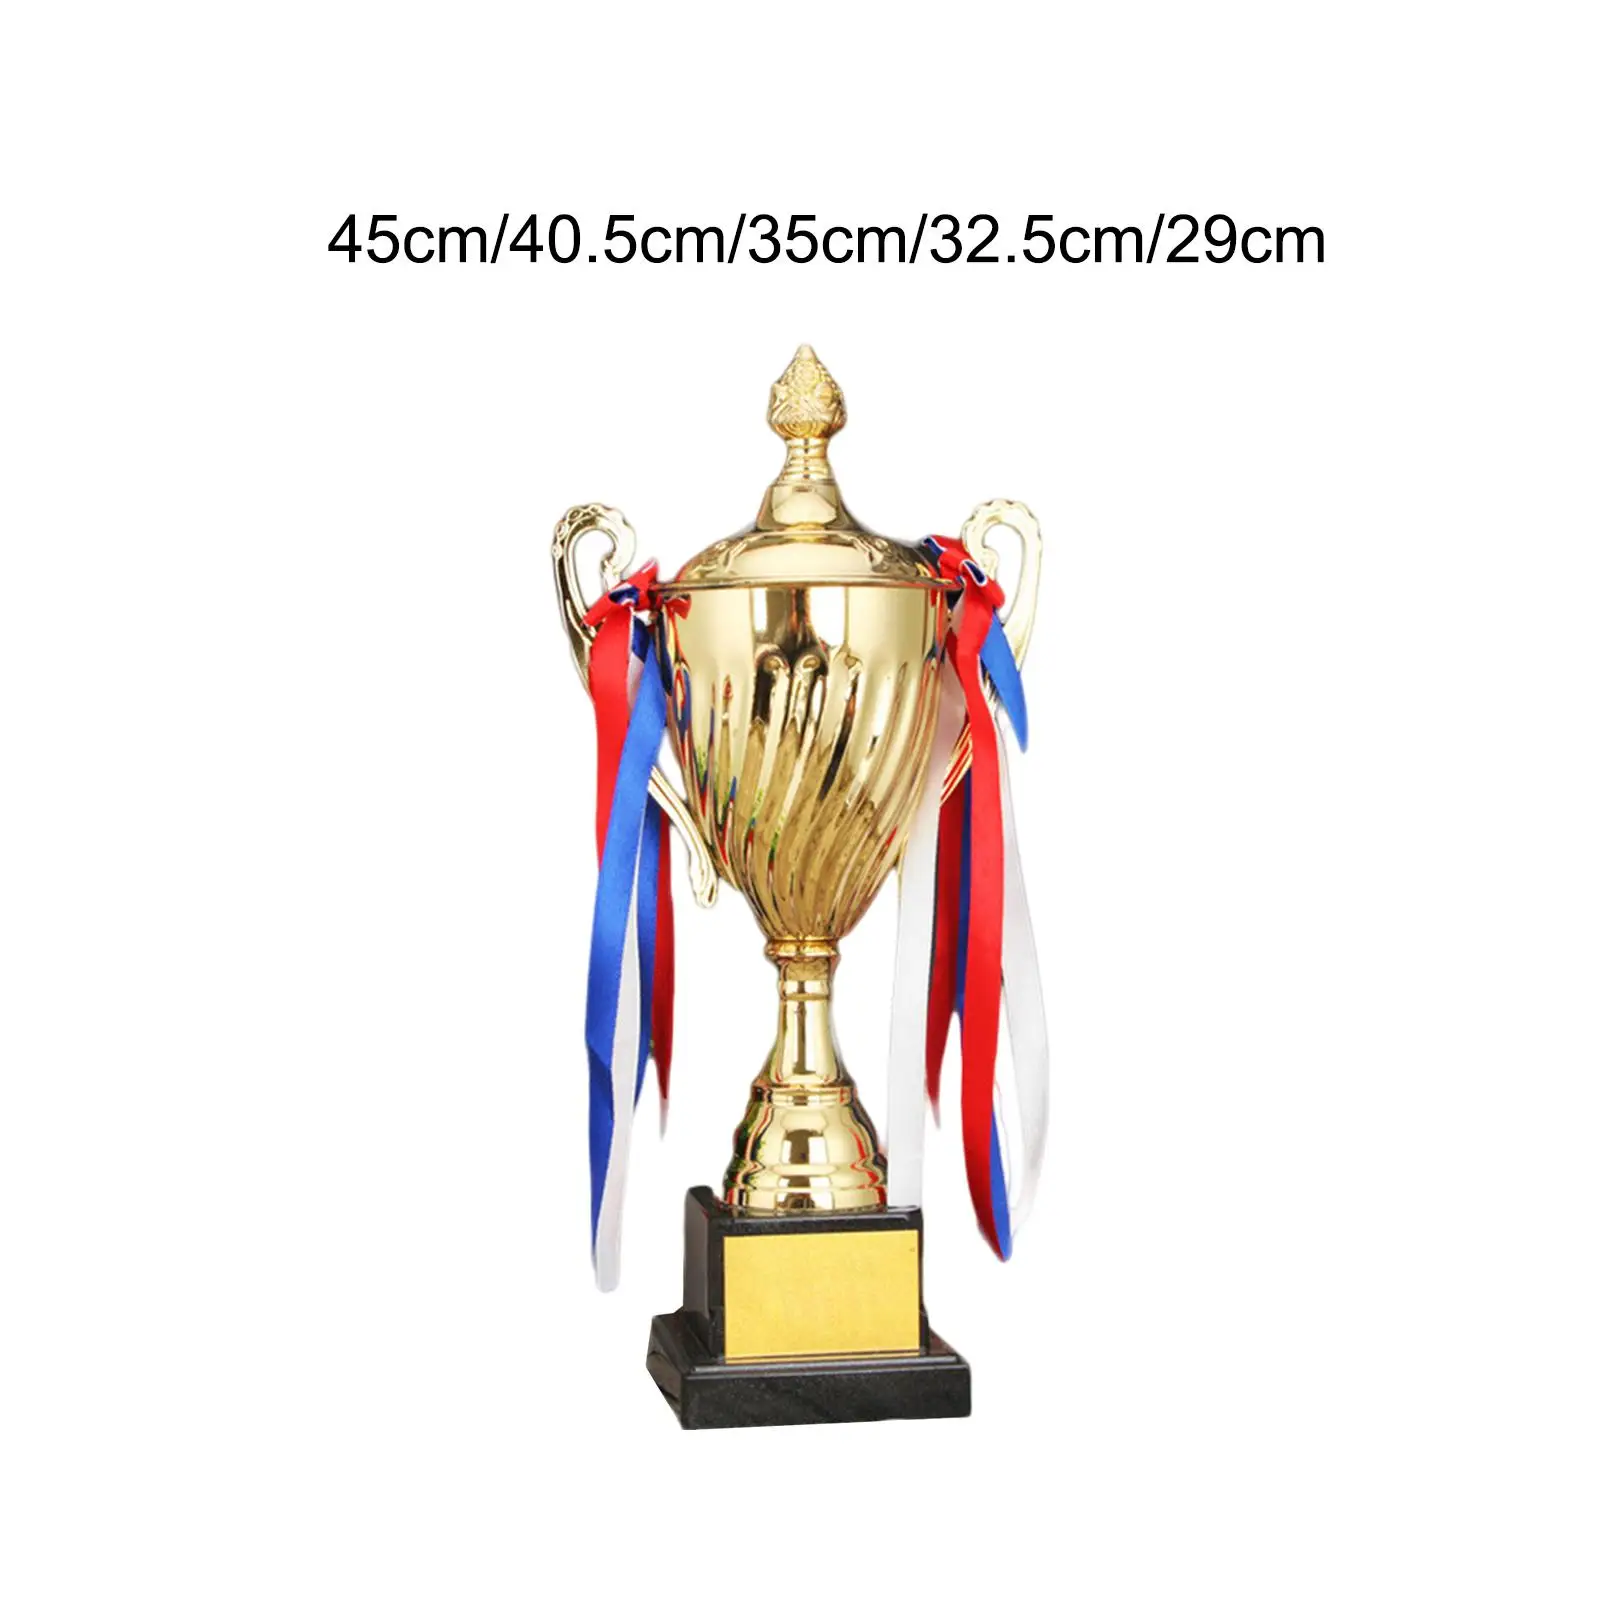 Award Trophy with Ribbon Metal Large Trophy Keepsake Event Props for School Tournament Soccer Football League Match Celebration